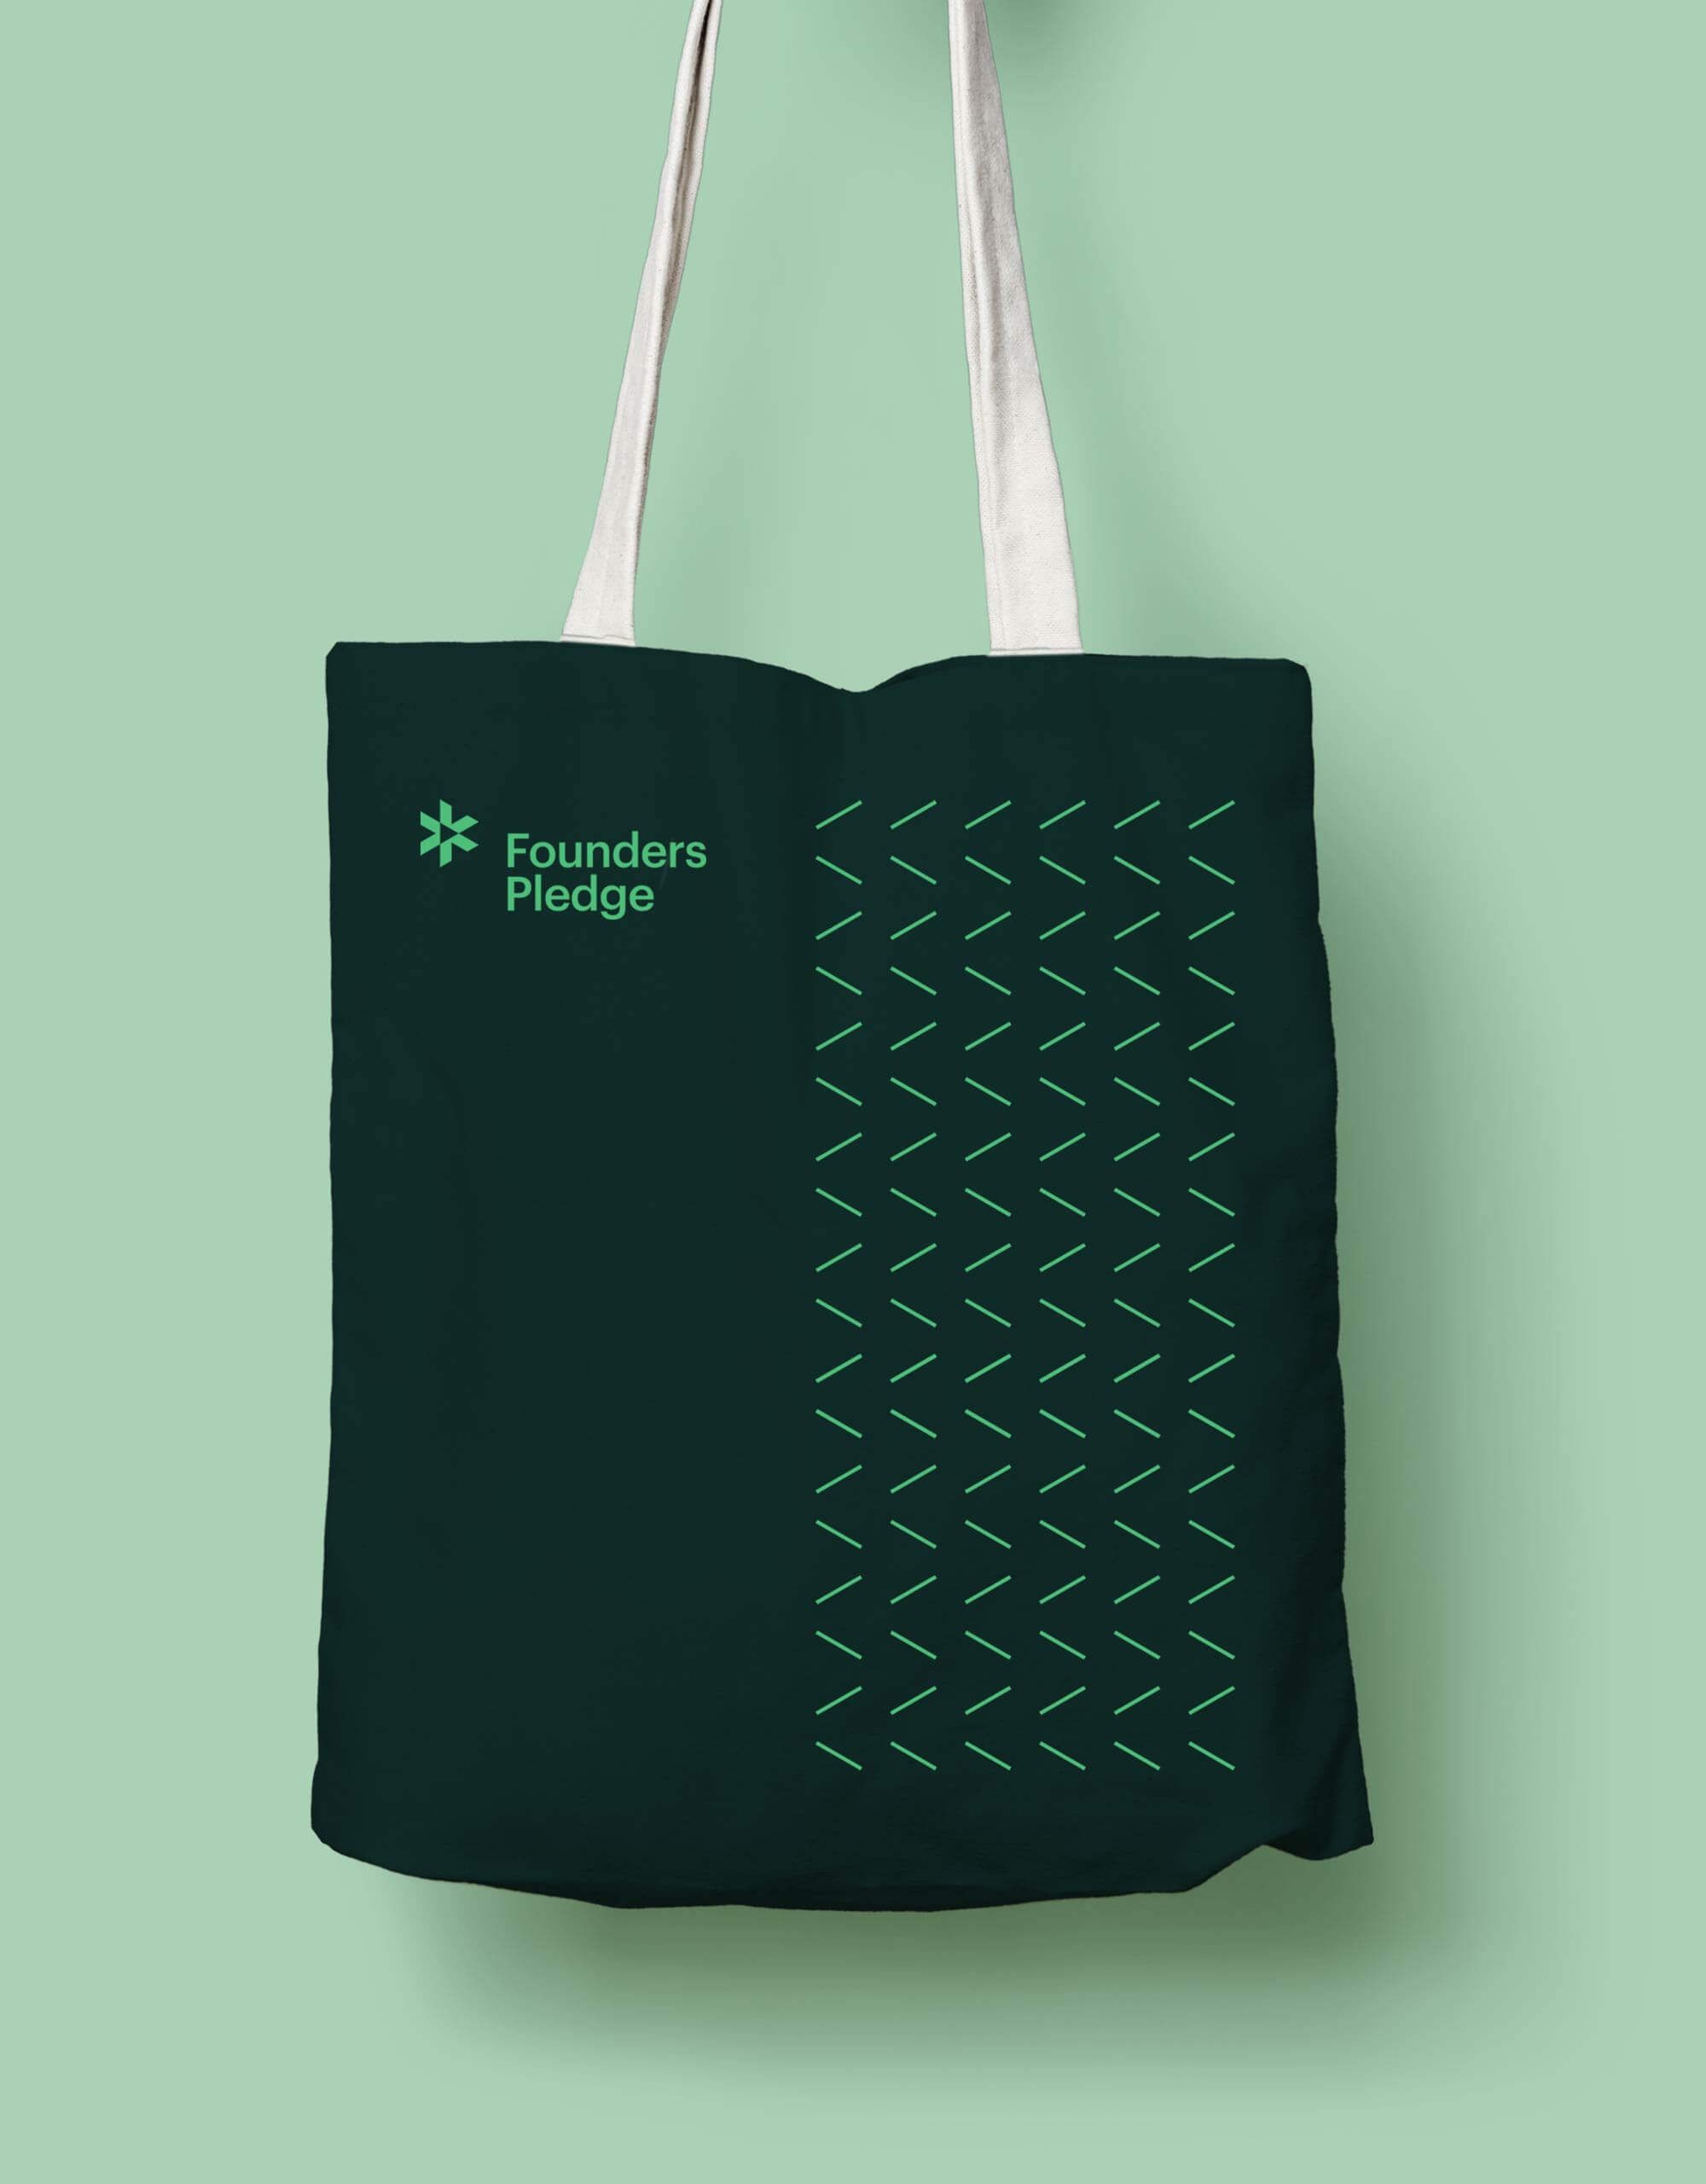 Beautiful Branded Tote Bags for Company Employees